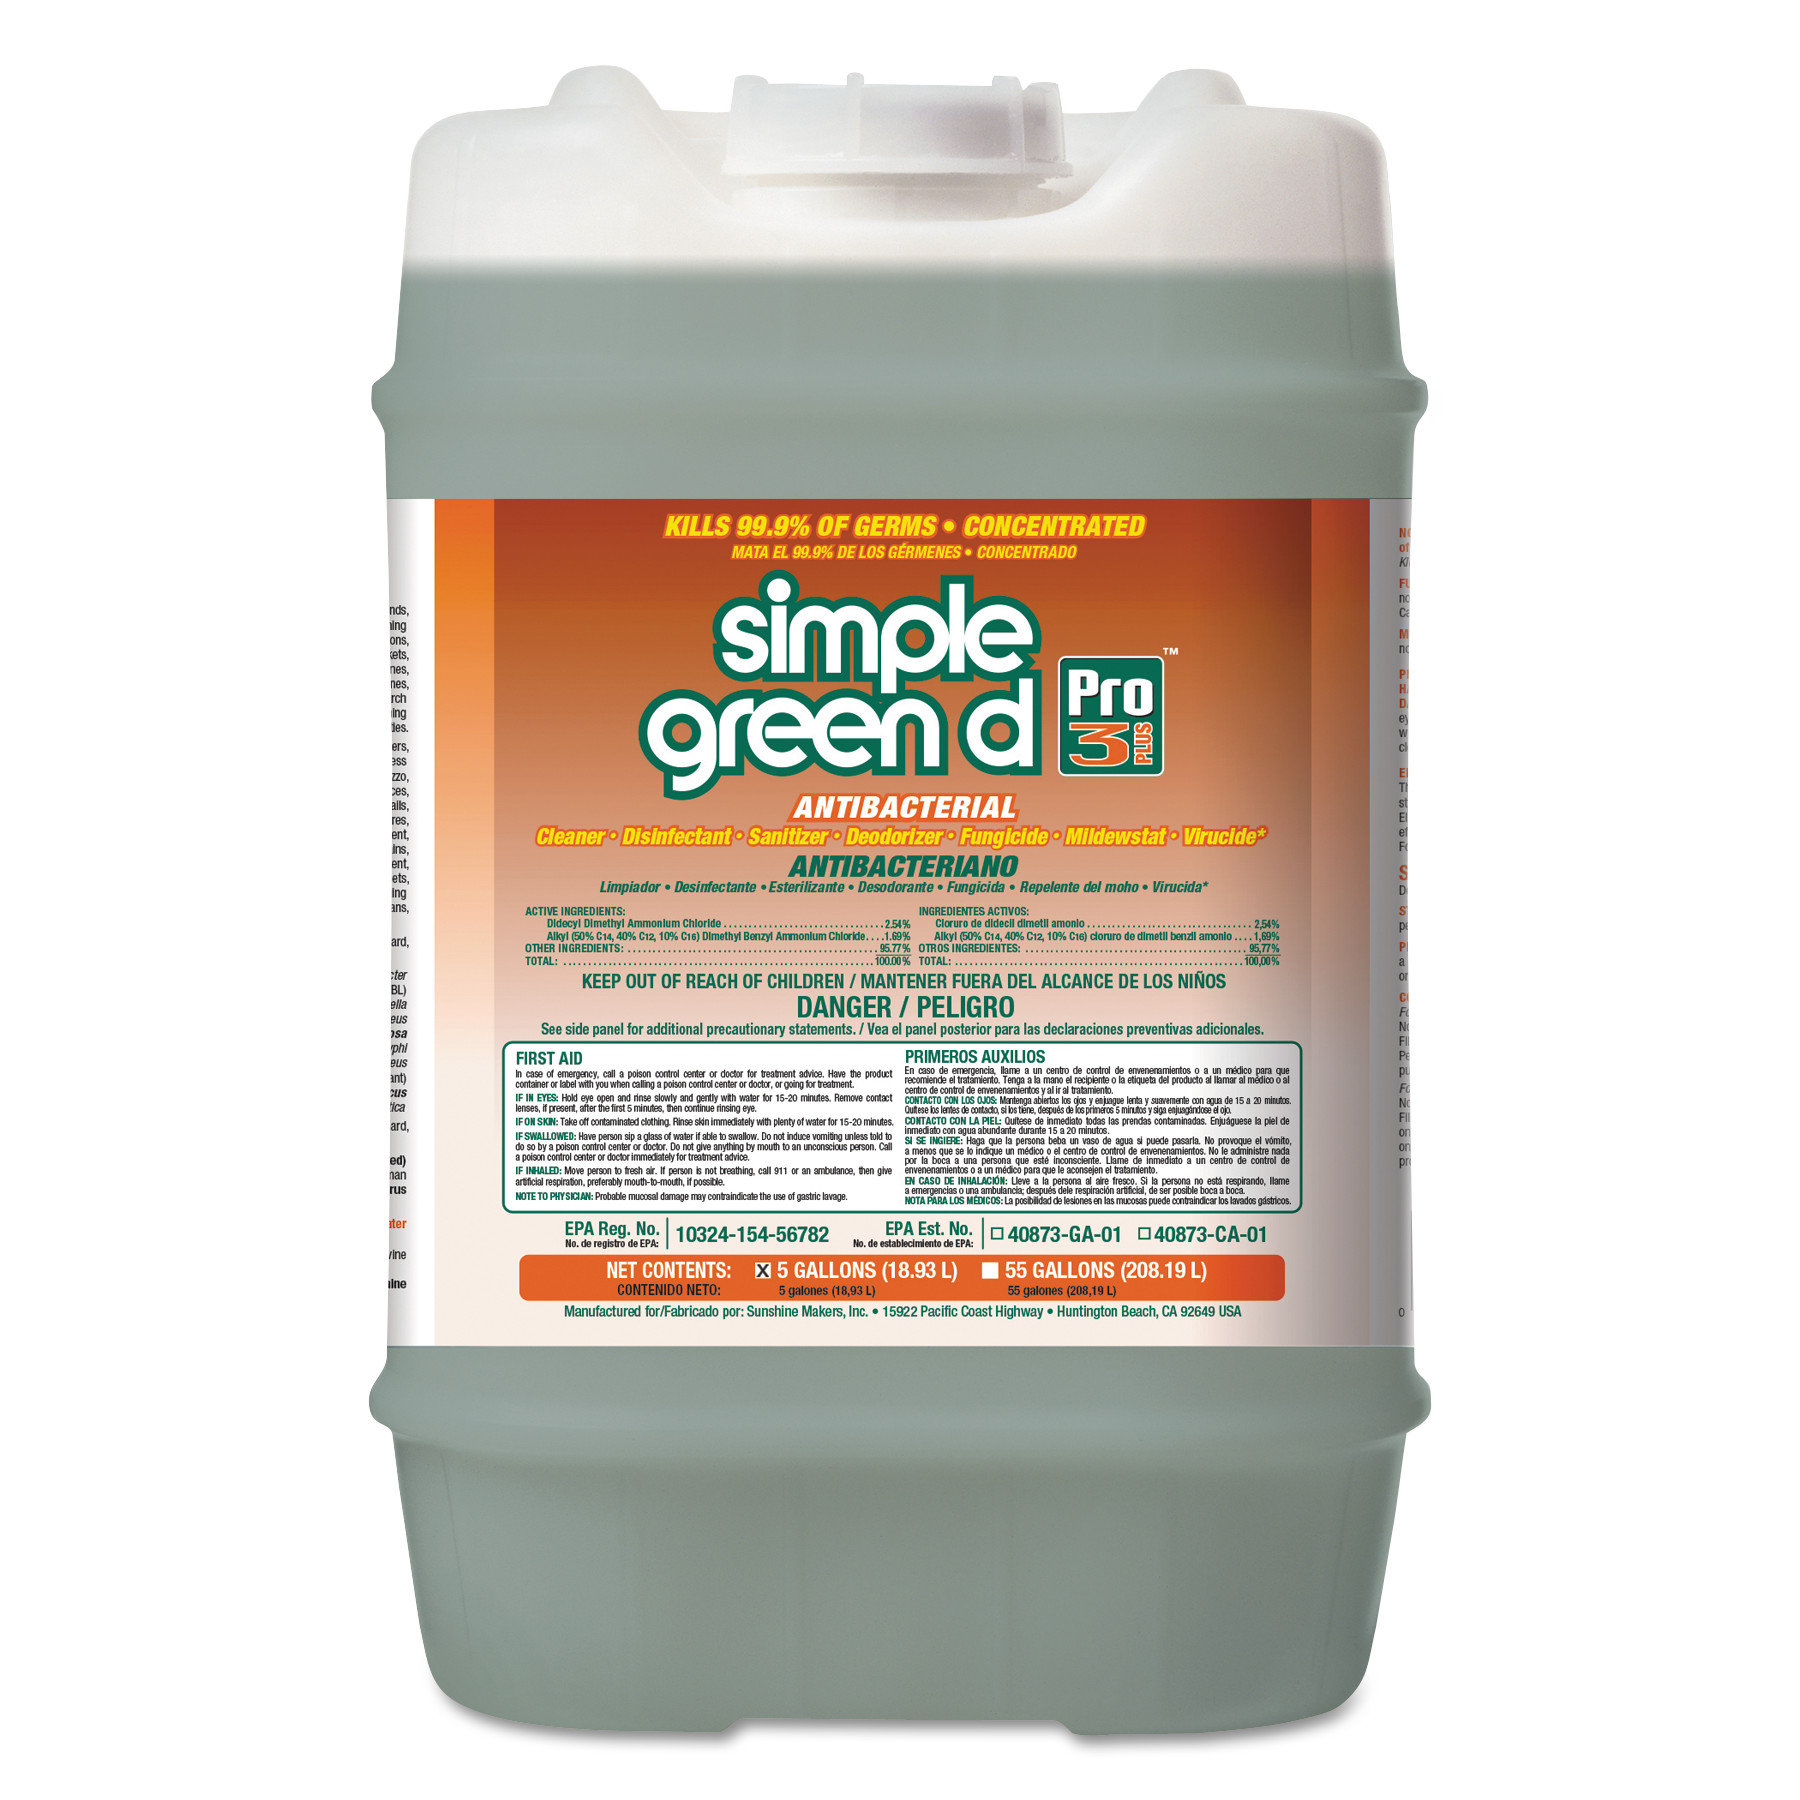  Simple Green 3300000101005 d Pro 3 Plus Antibacterial Concentrate, Herbal, 5 gal Pail (SMP01005) 